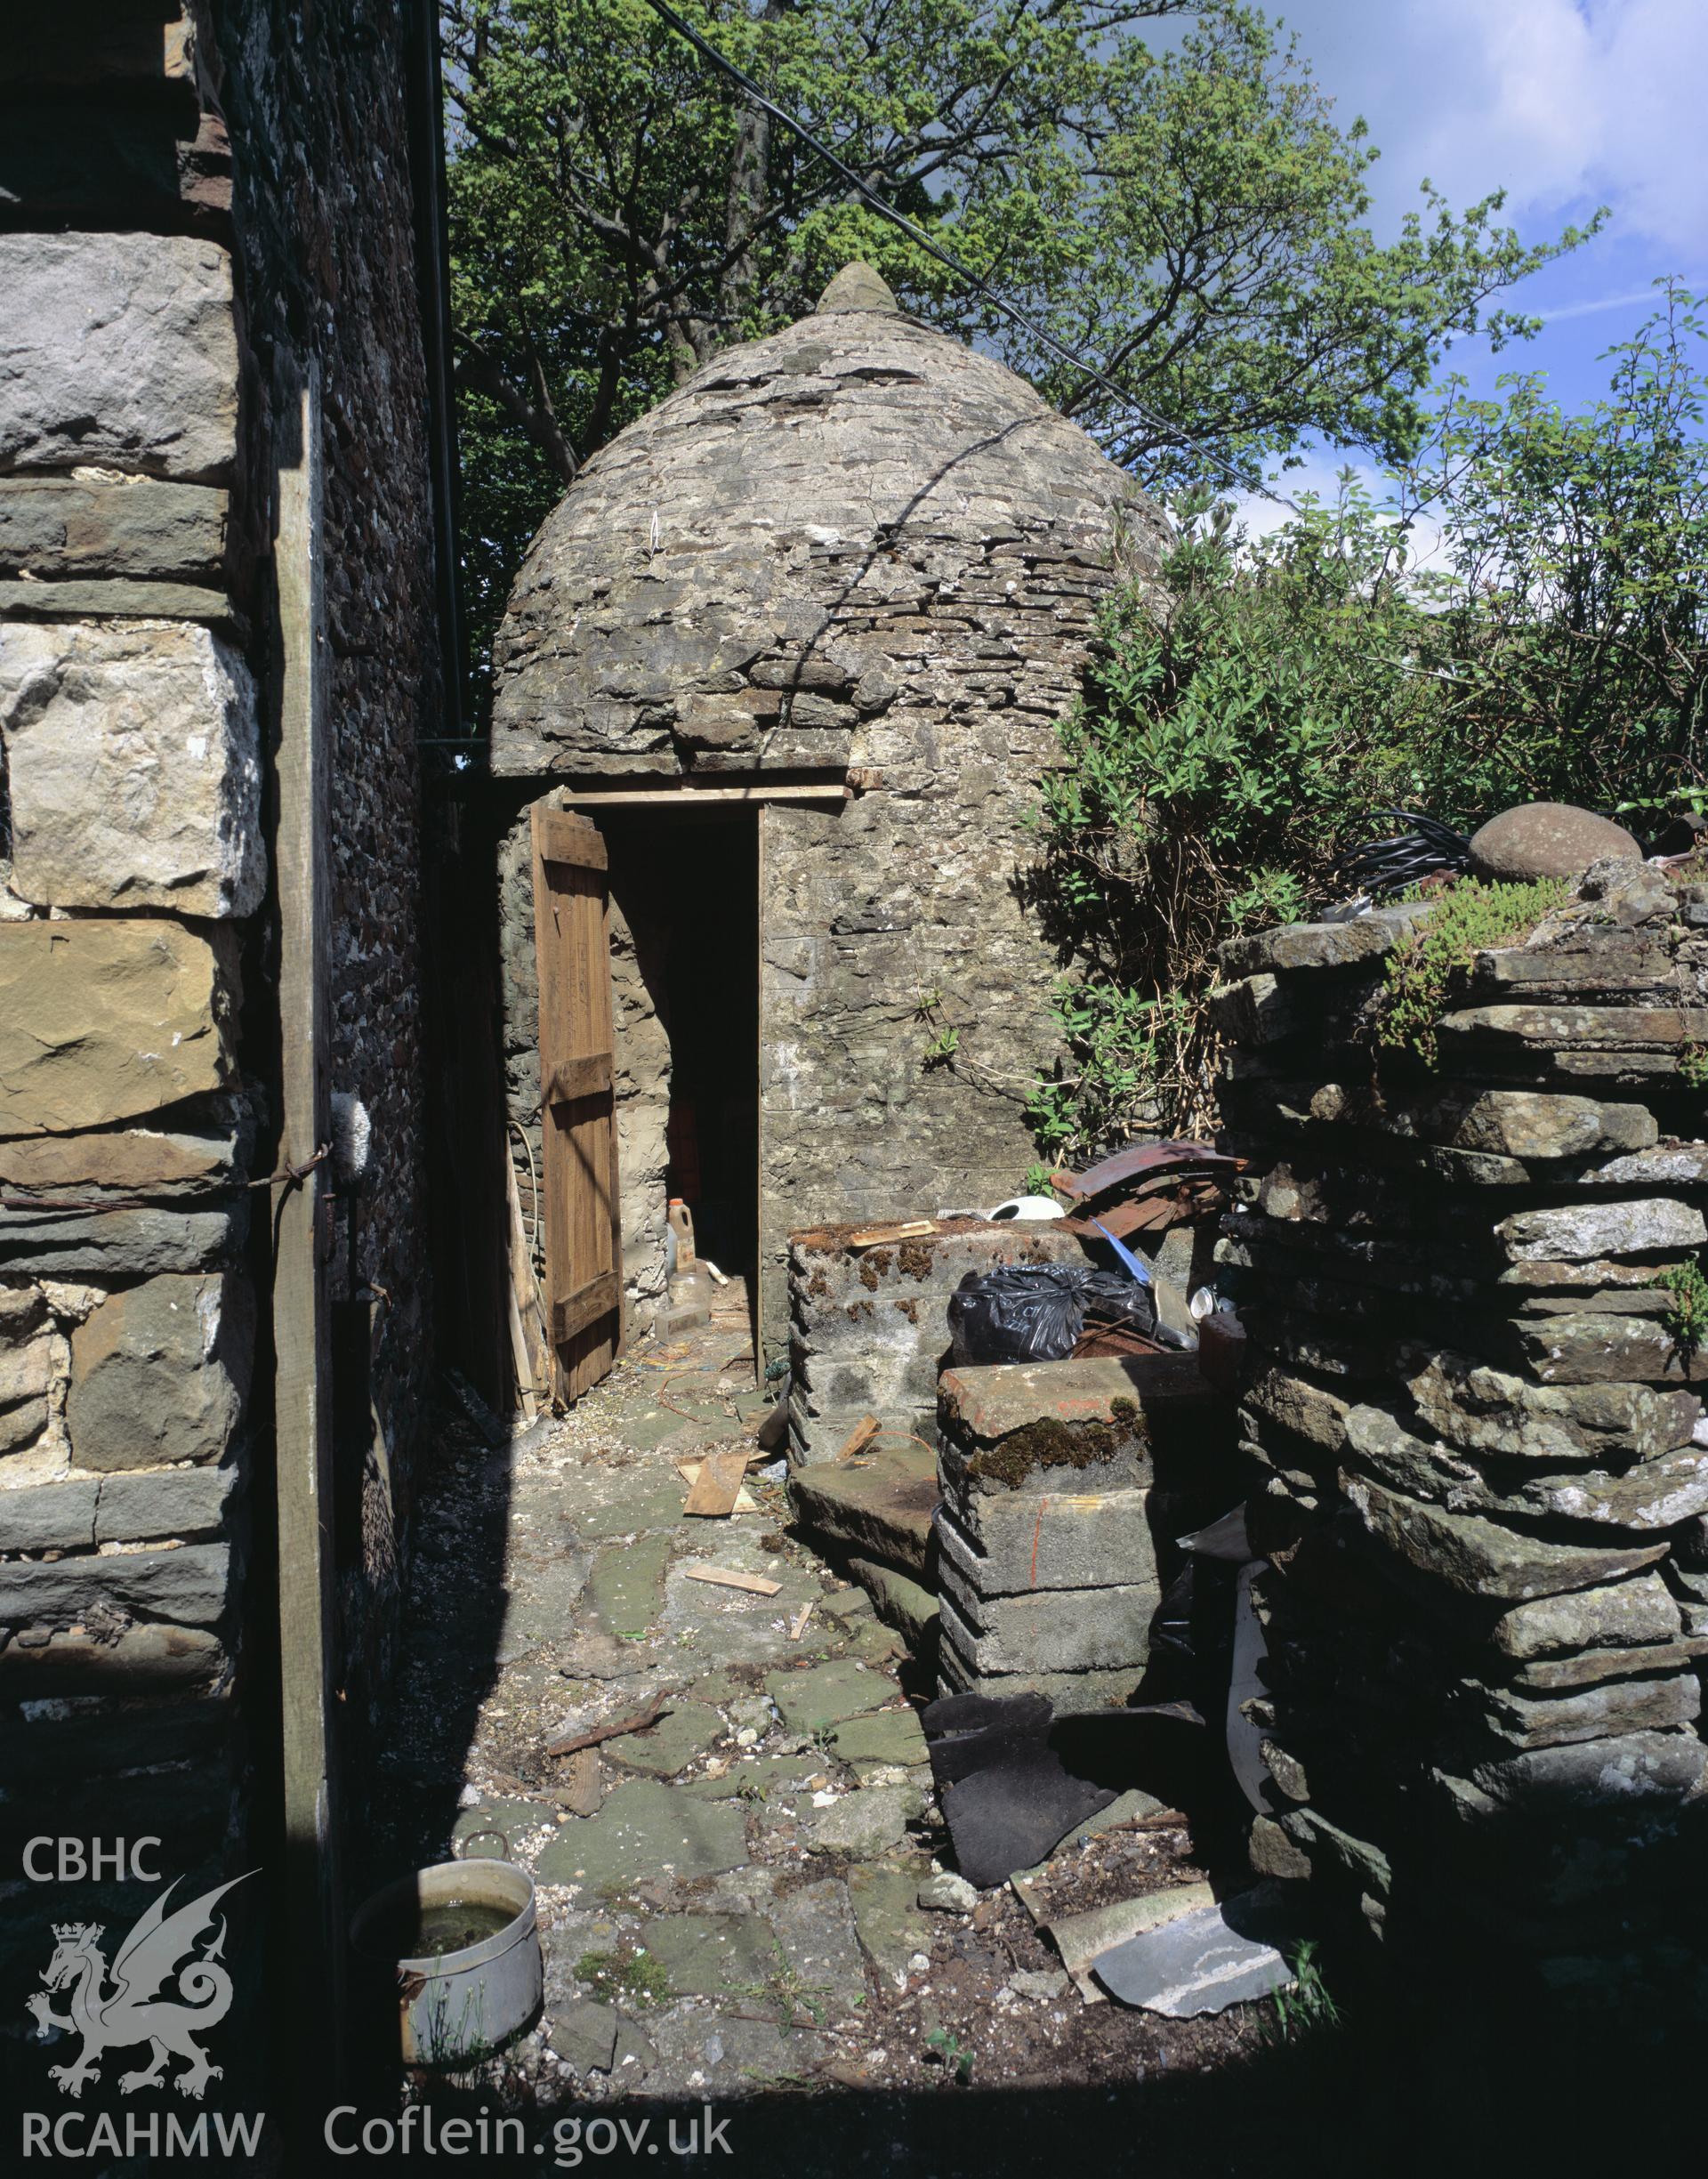 Colour transparency showing a view of Pencaedrain Pigsty, Bargoed produced by Iain Wright, May 2003